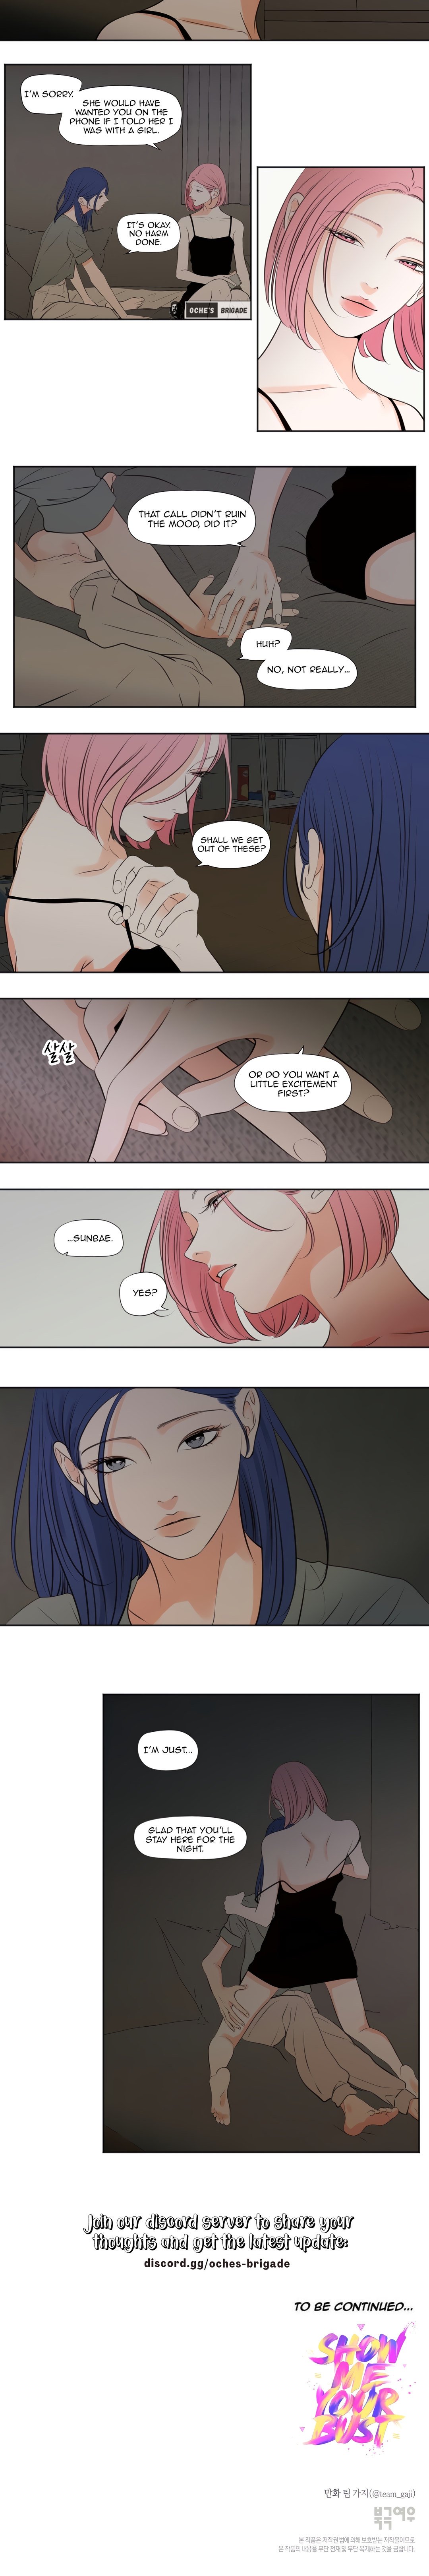 show-me-your-bust-chap-31-5